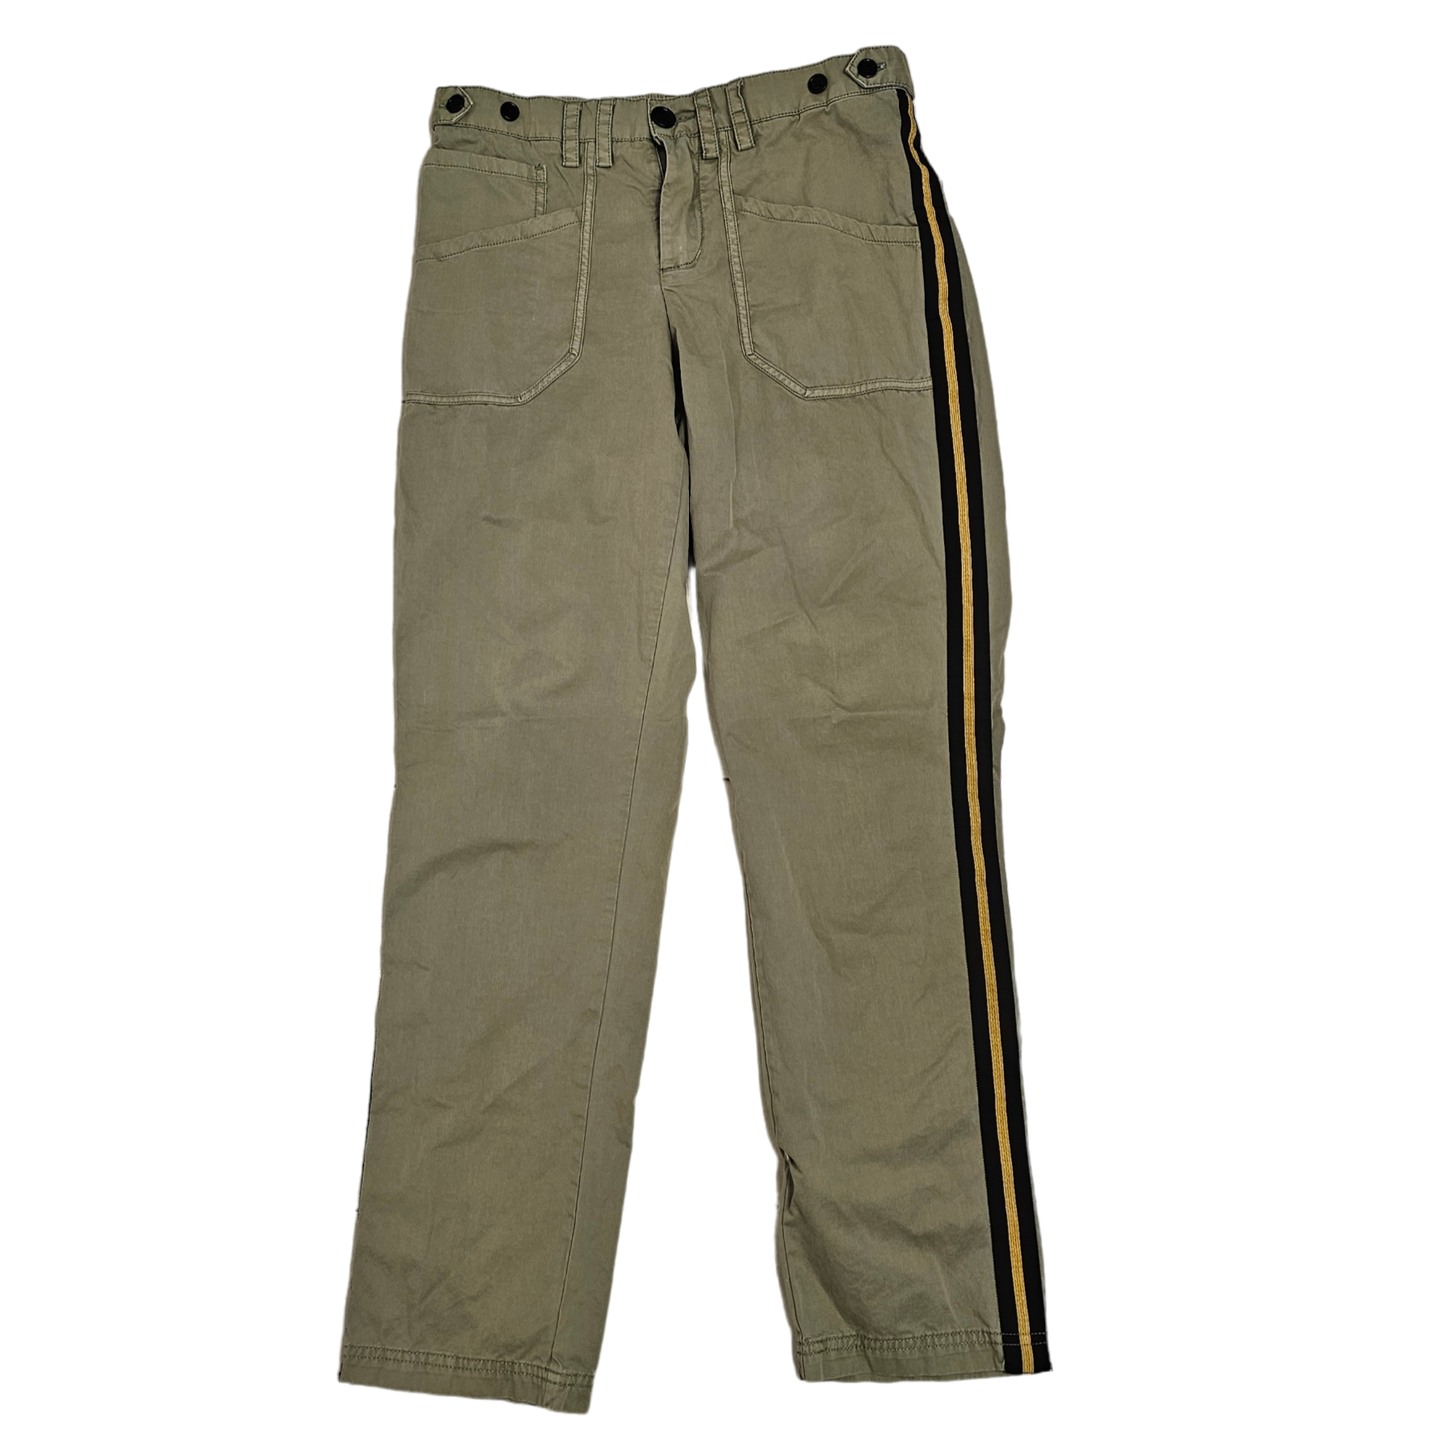 Pants Designer By Zadig And Voltaire  Size: M